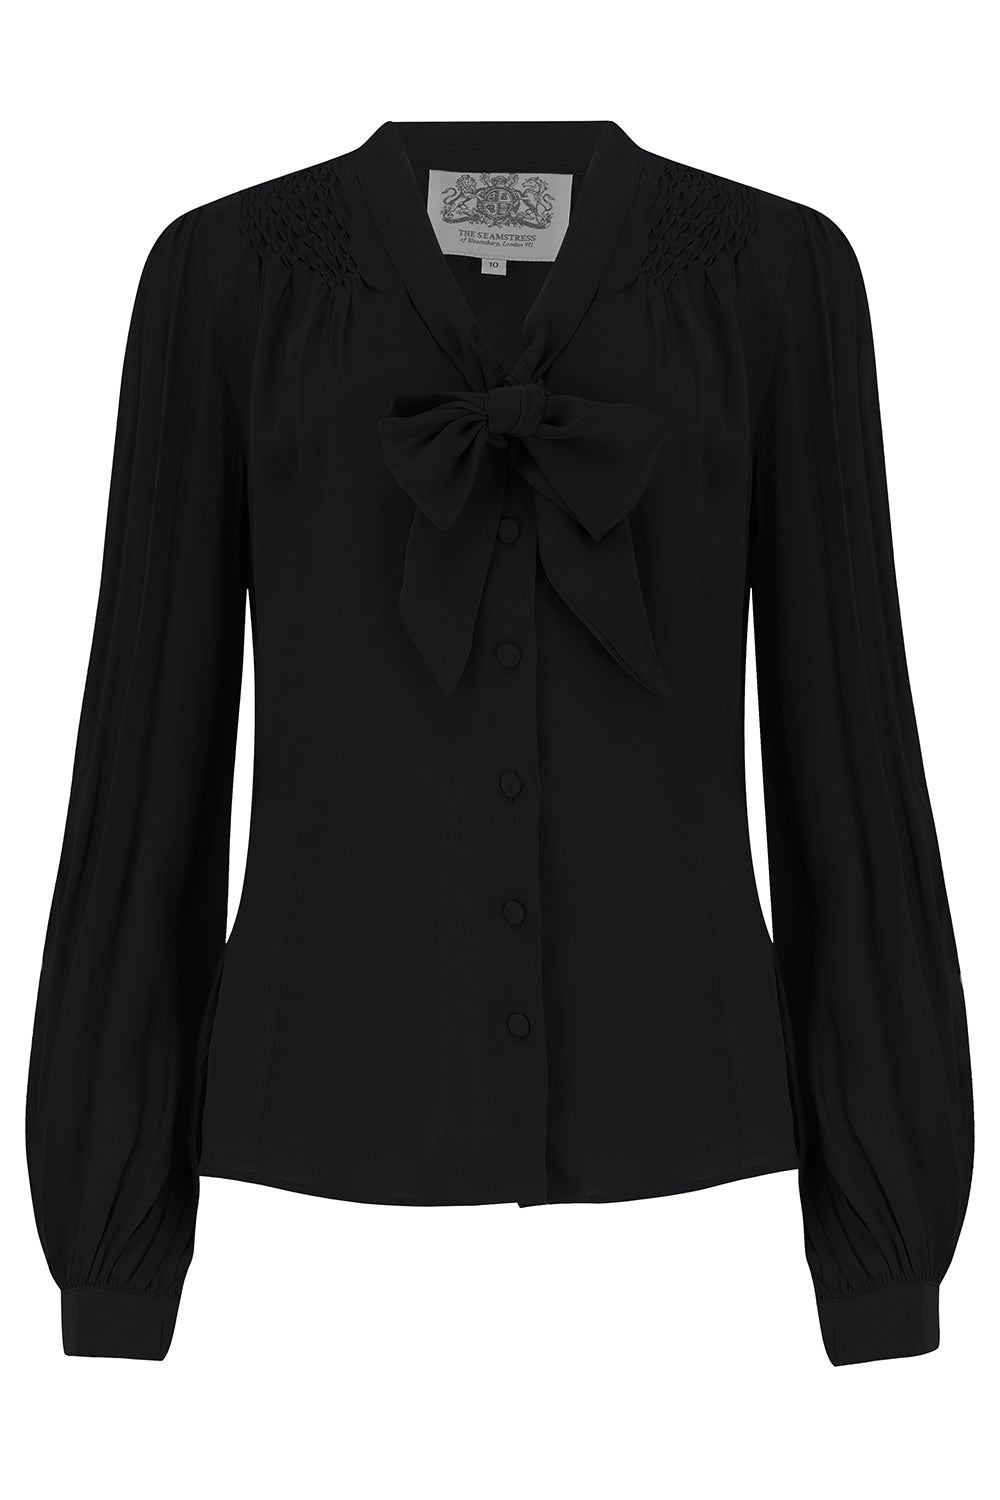 Eva Long Sleeve Blouse in Solid Black, Authentic & Classic 1940s Vintage Style product